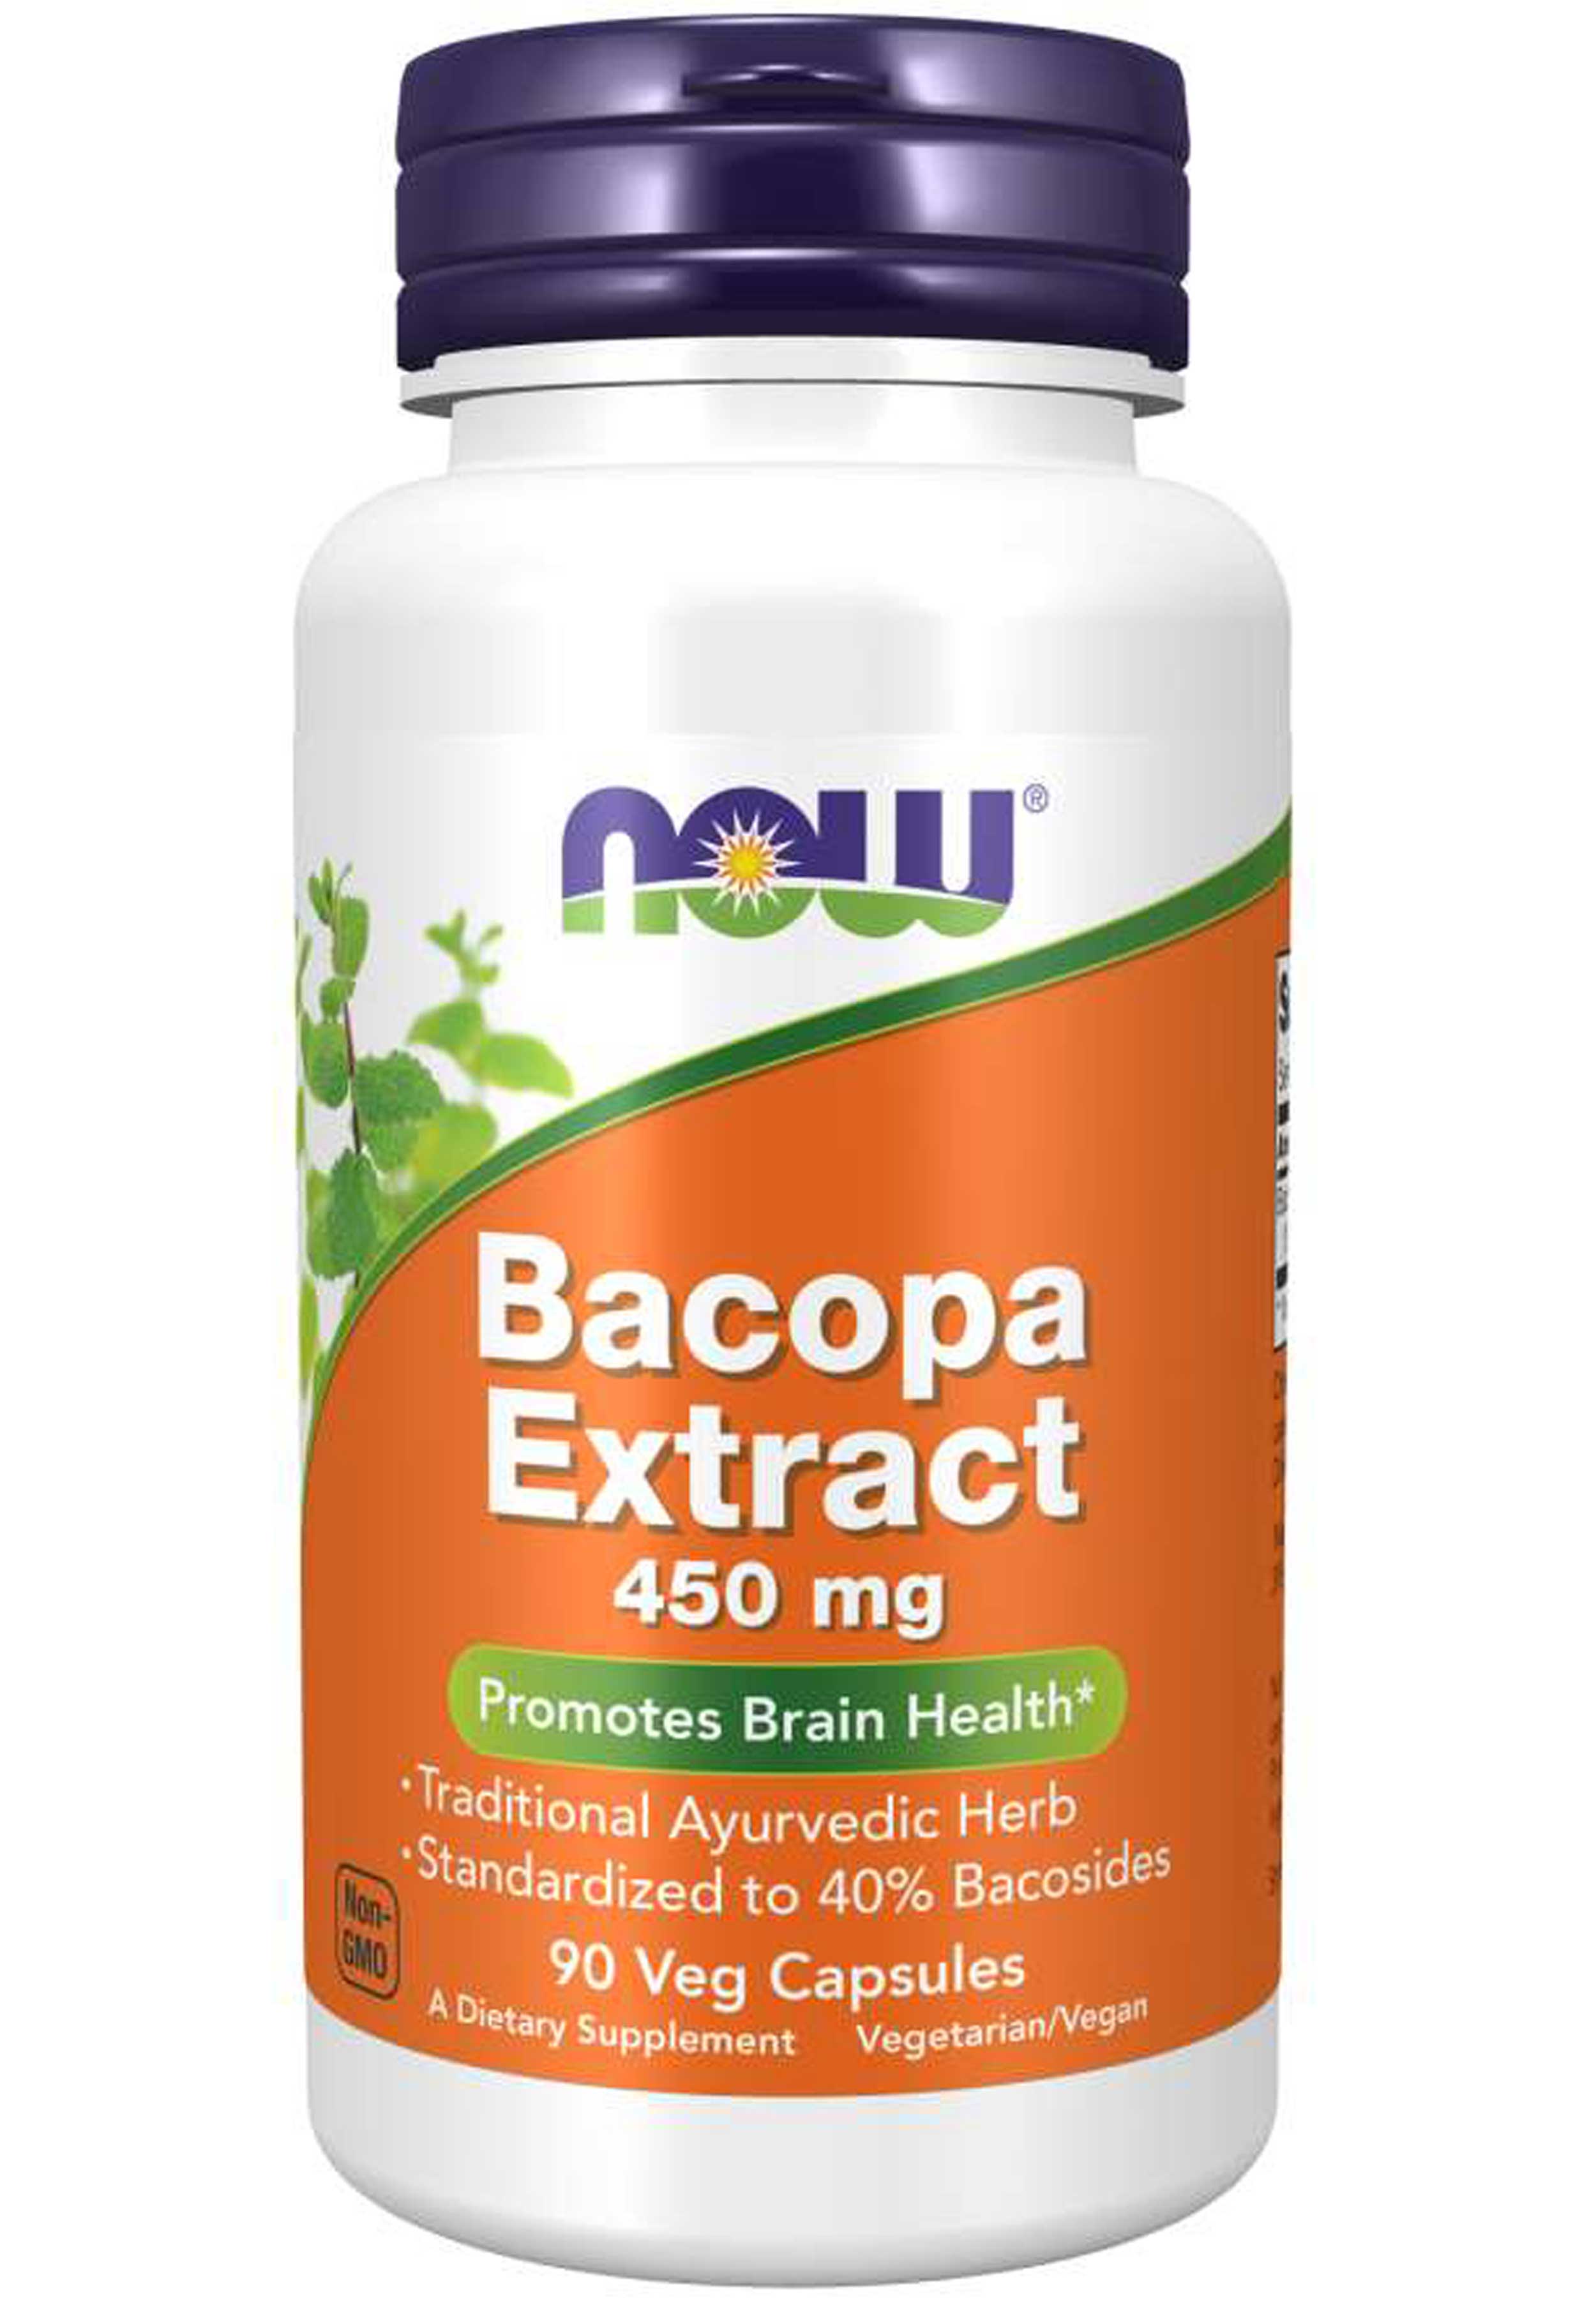 NOW Bacopa Extract 450 mg